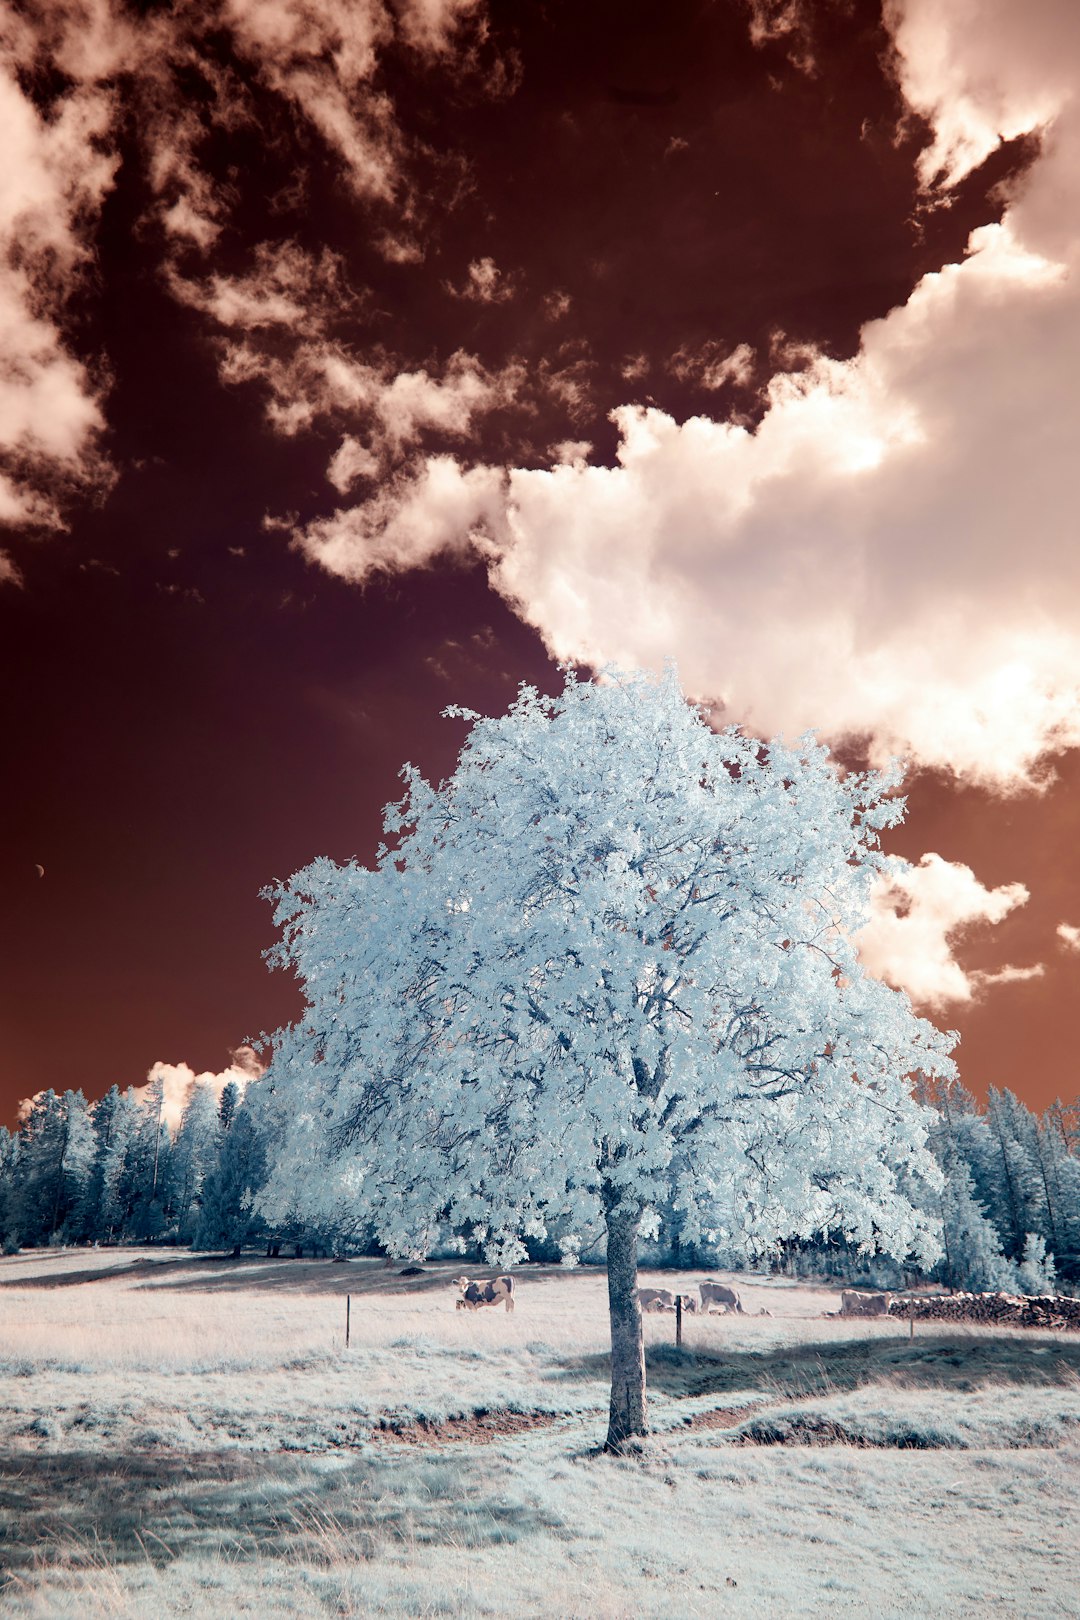 white tree on snow covered ground under blue and white cloudy sky during daytime